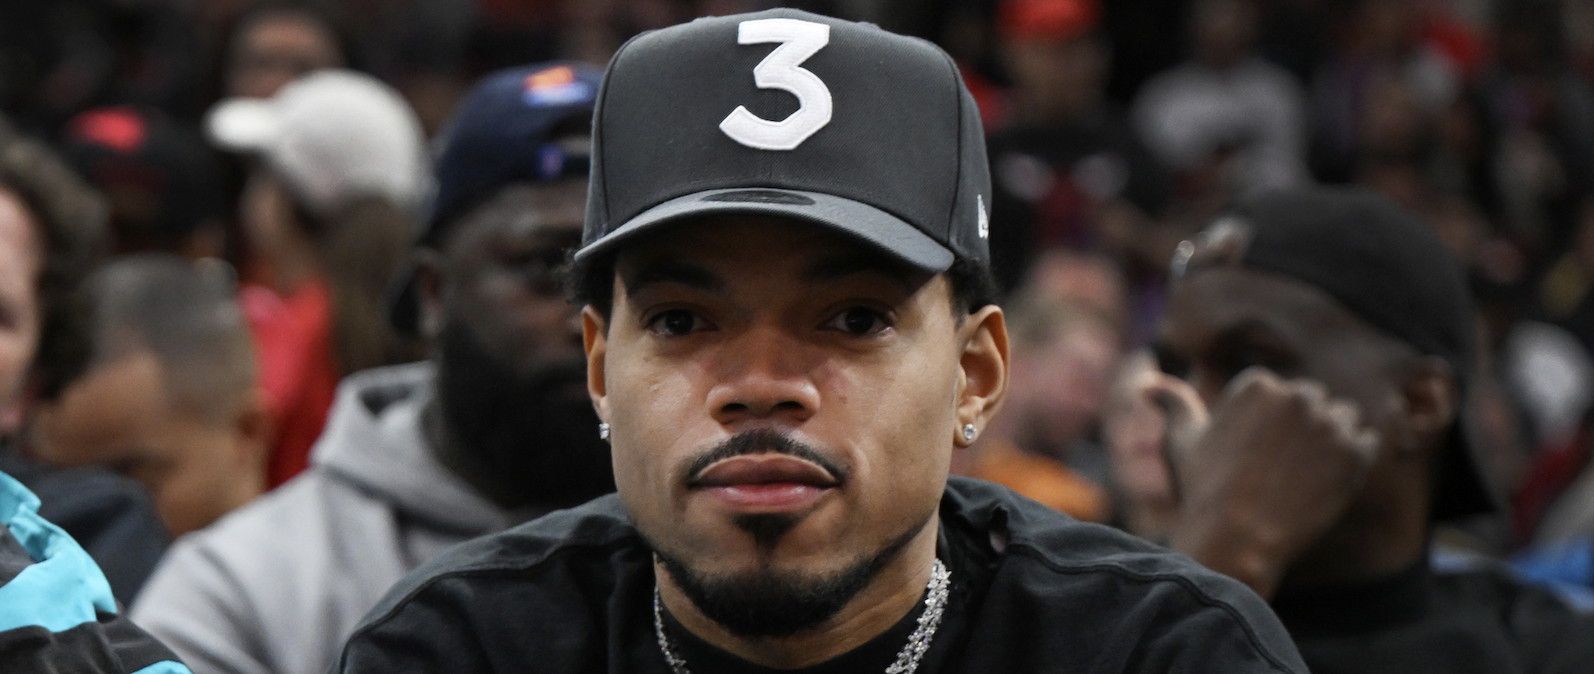 Chance The Rapper Called Out For Provocative Dance Despite Being Married